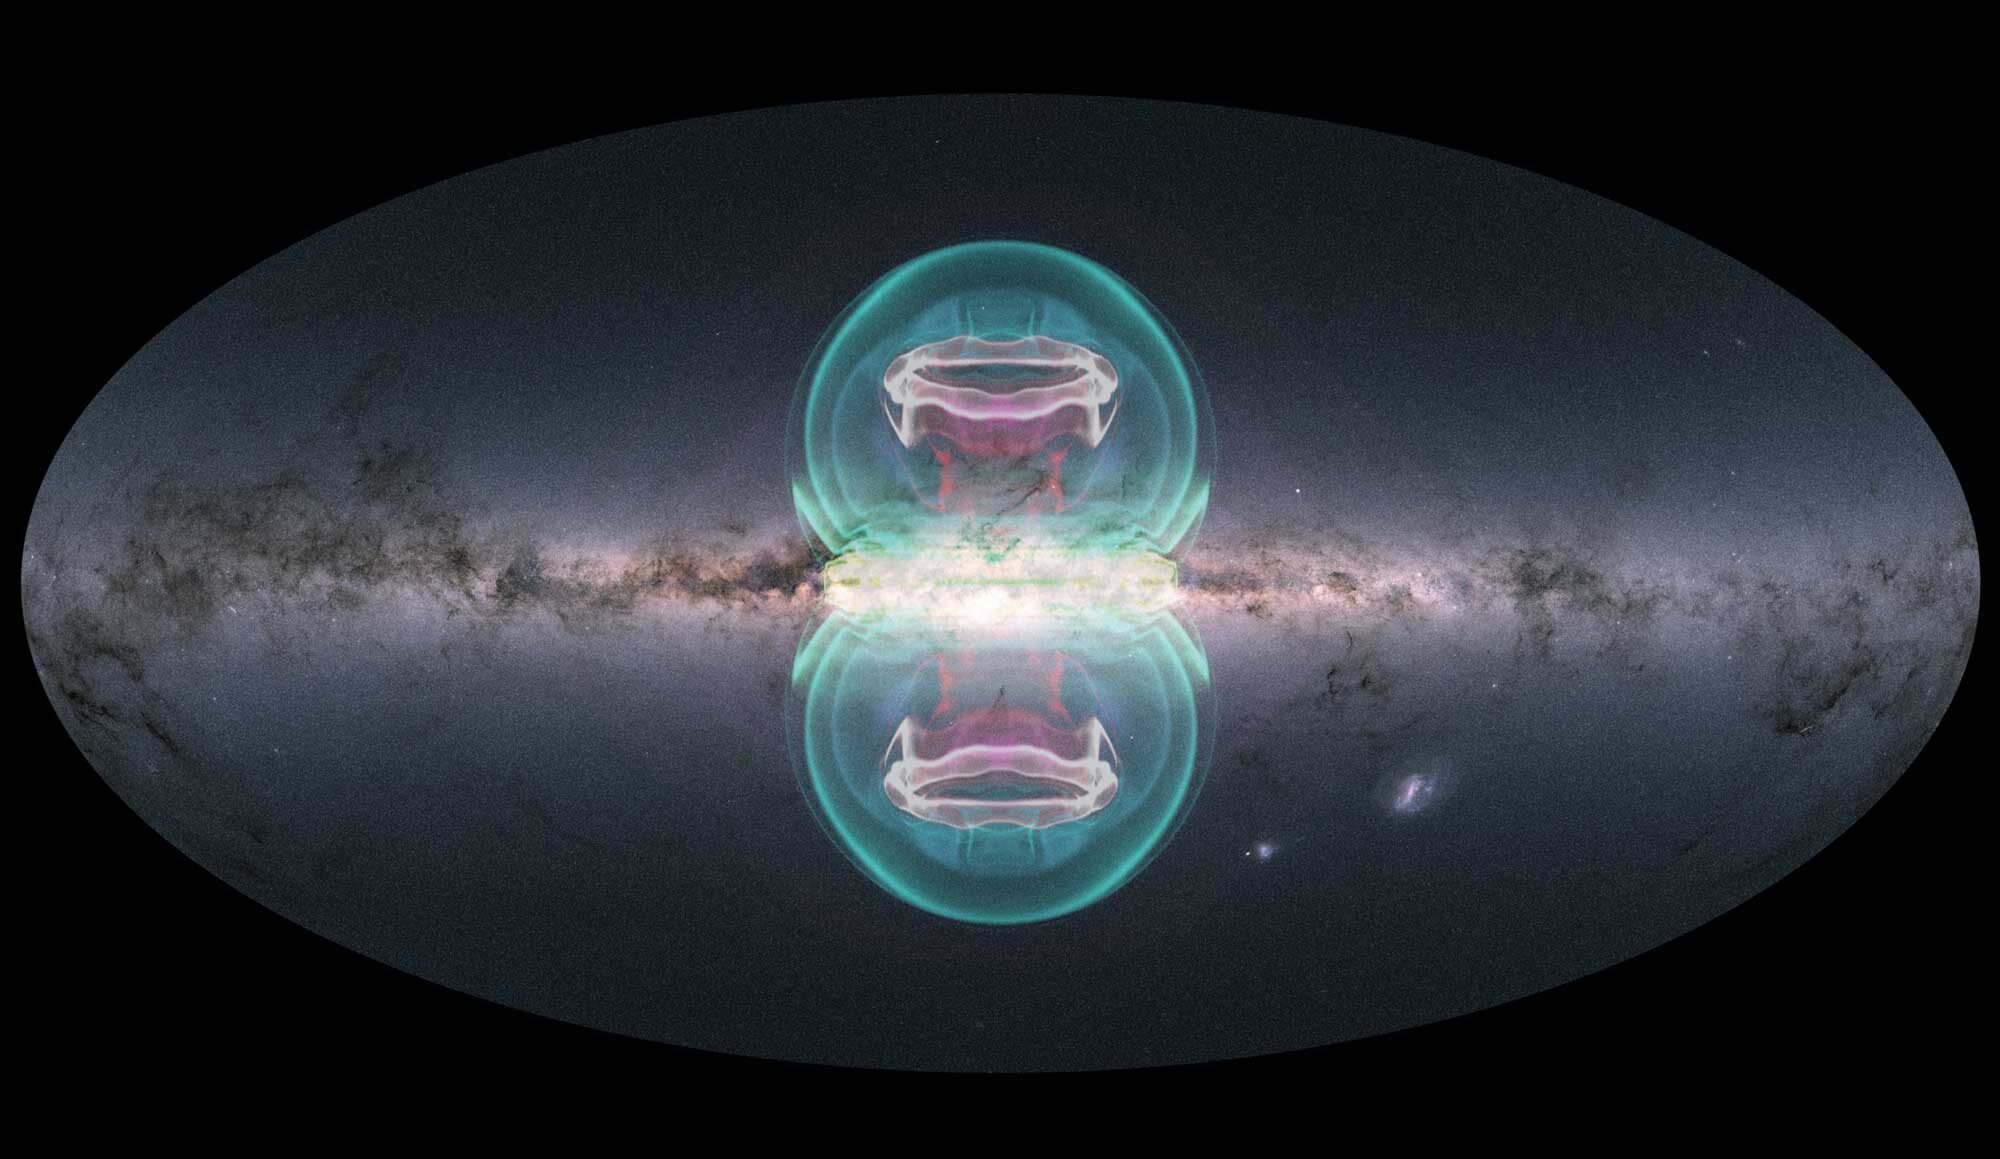 The NASA visualization team created a superposition of an image of the Milky Way